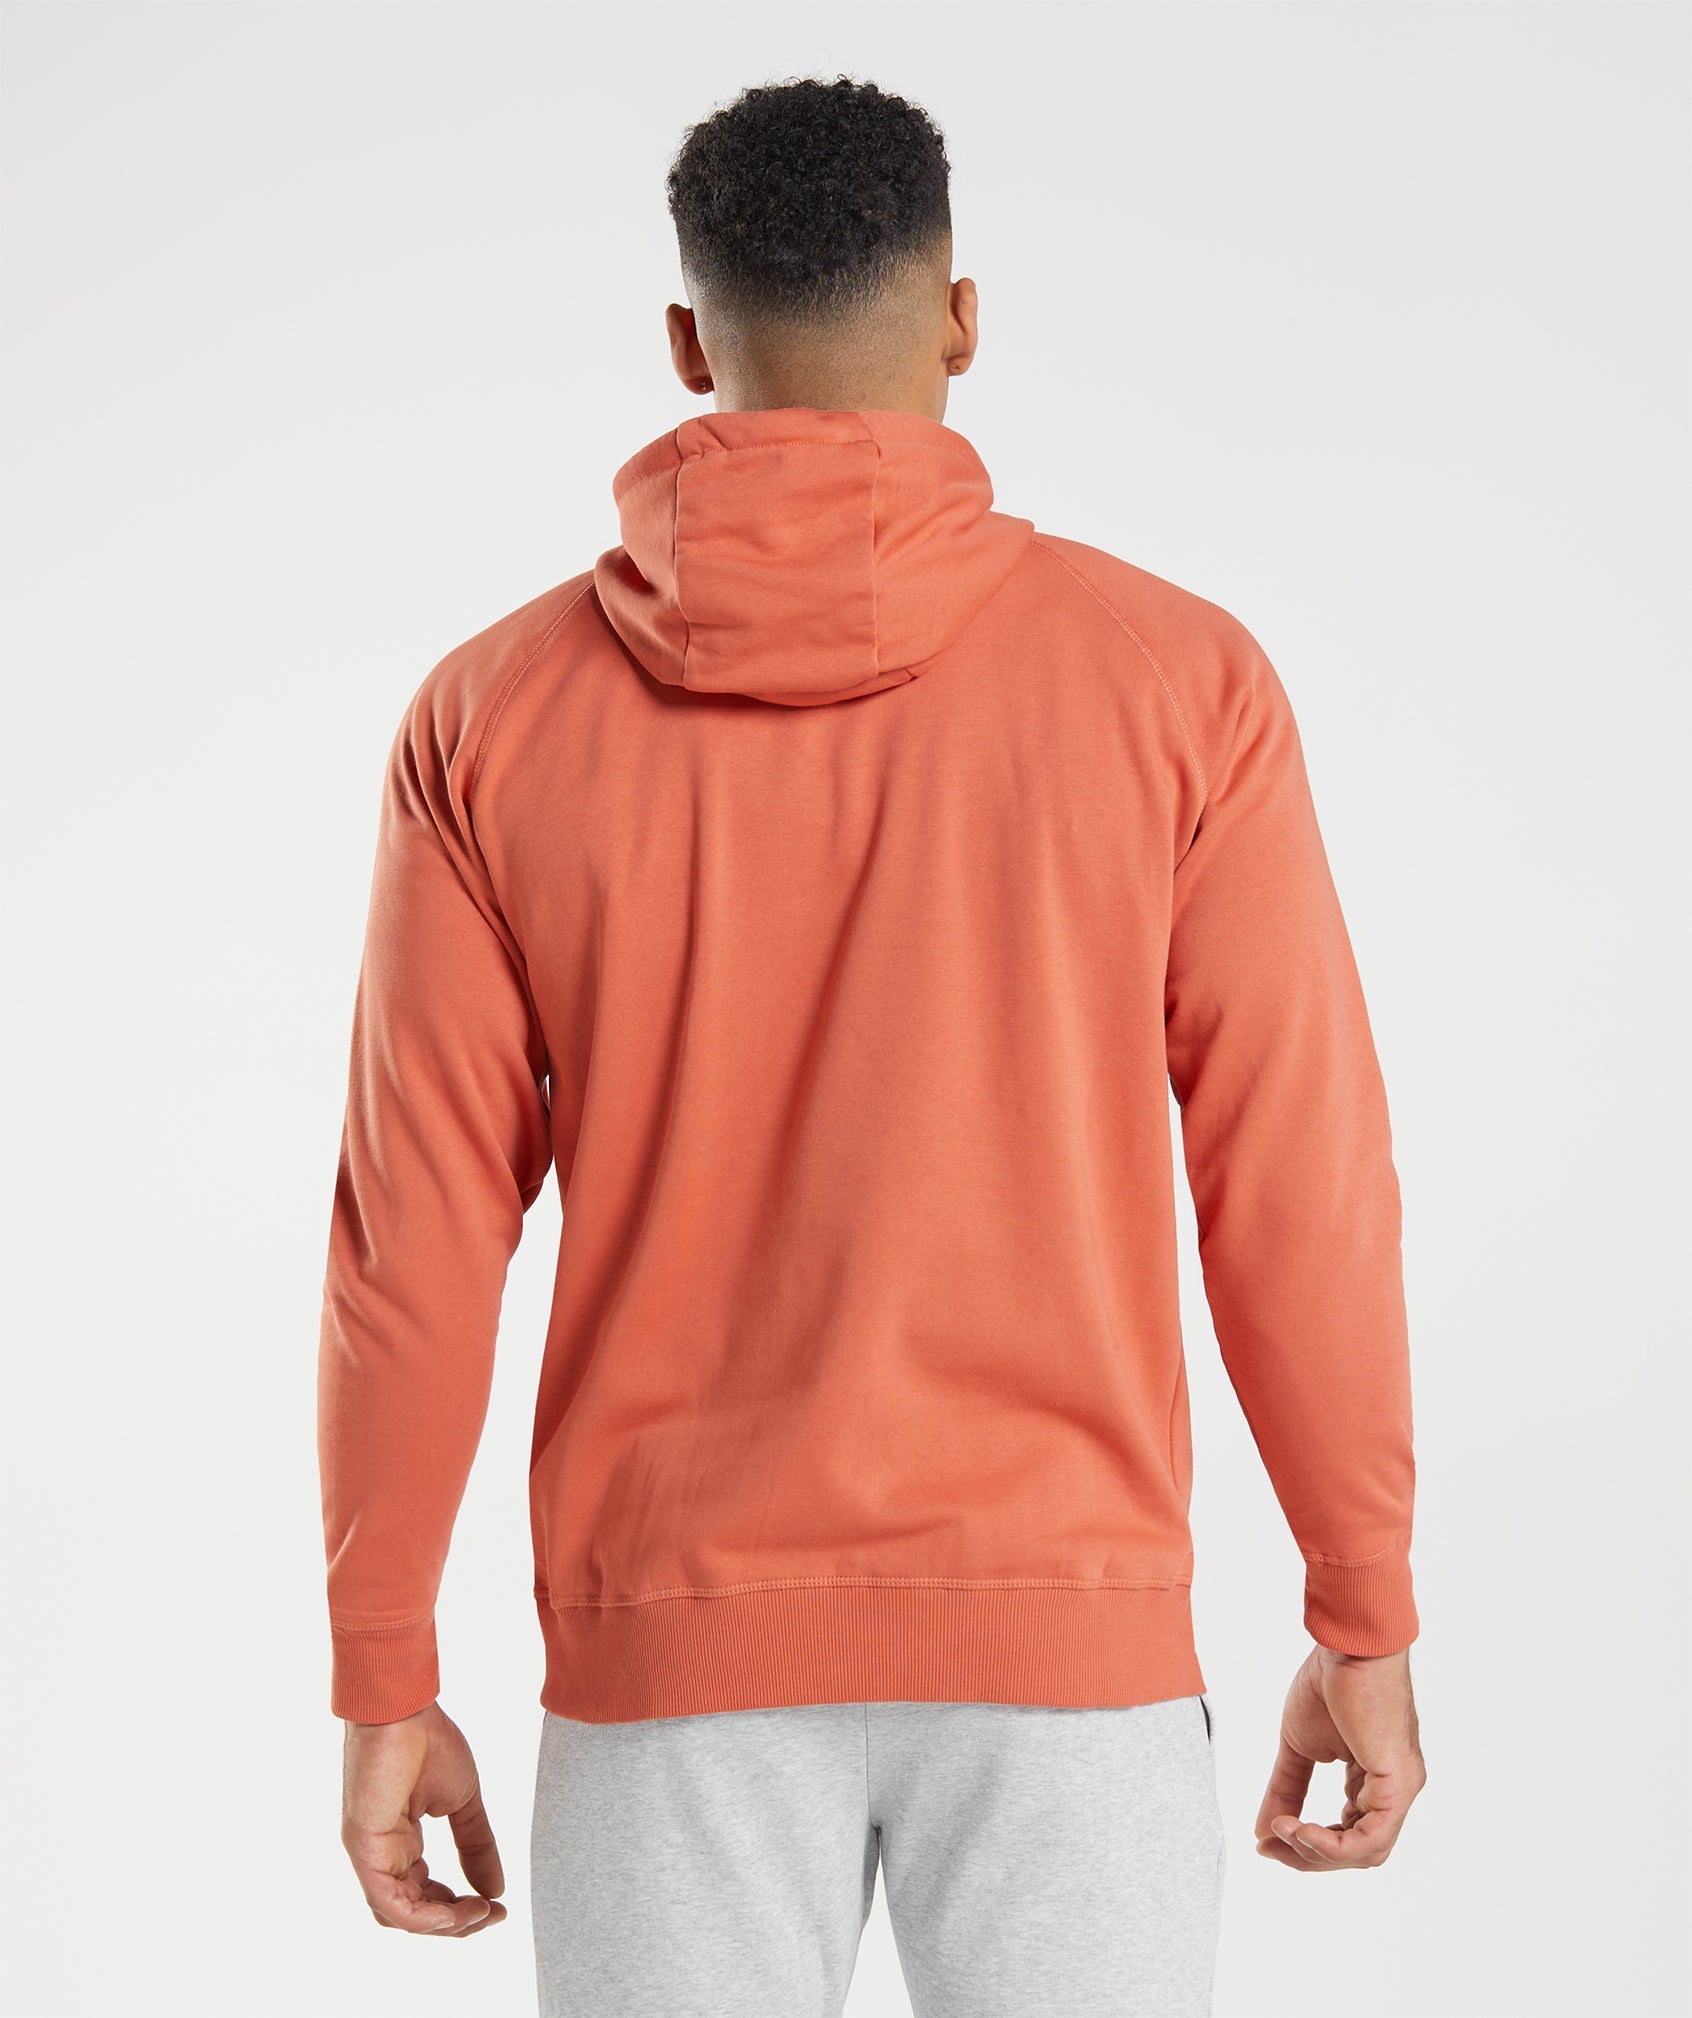 Apollo Hoodie in Storm Red - view 2